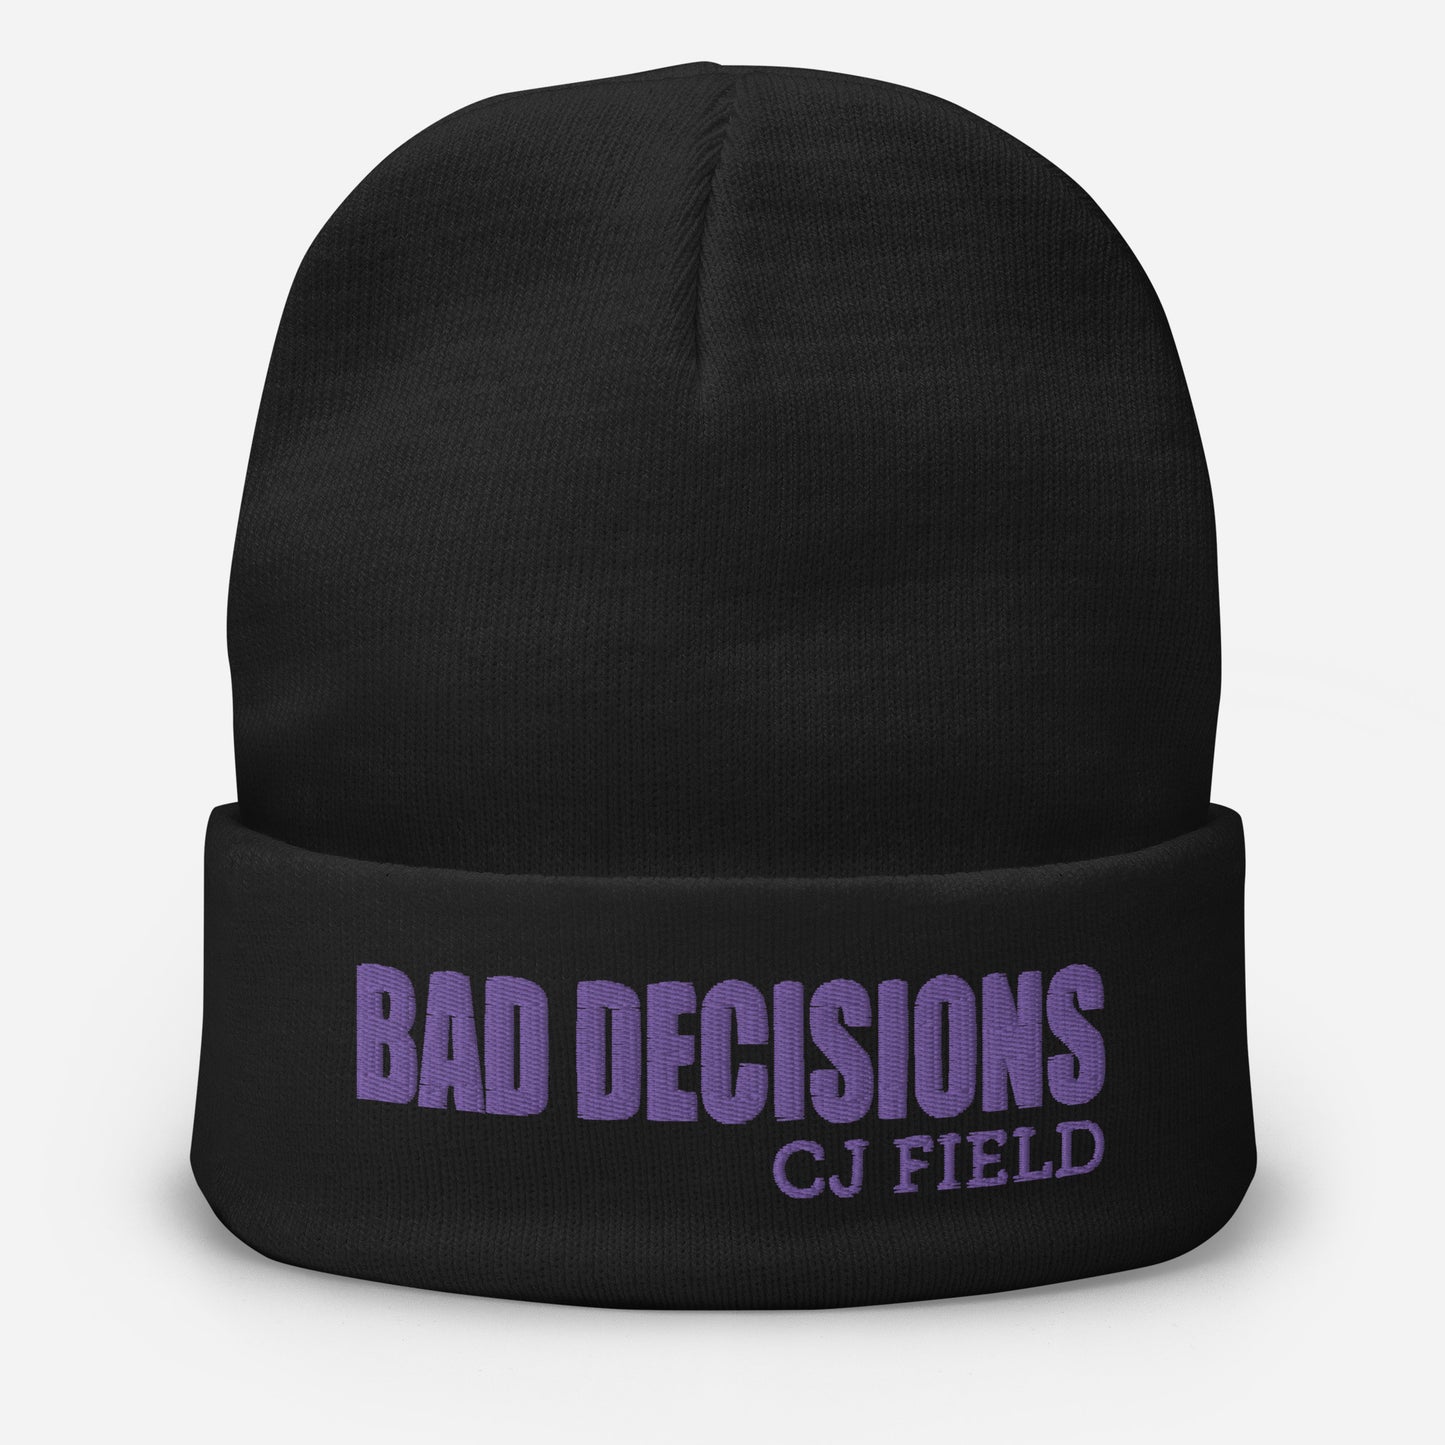 "Bad Decisions" Embroidered Beanie